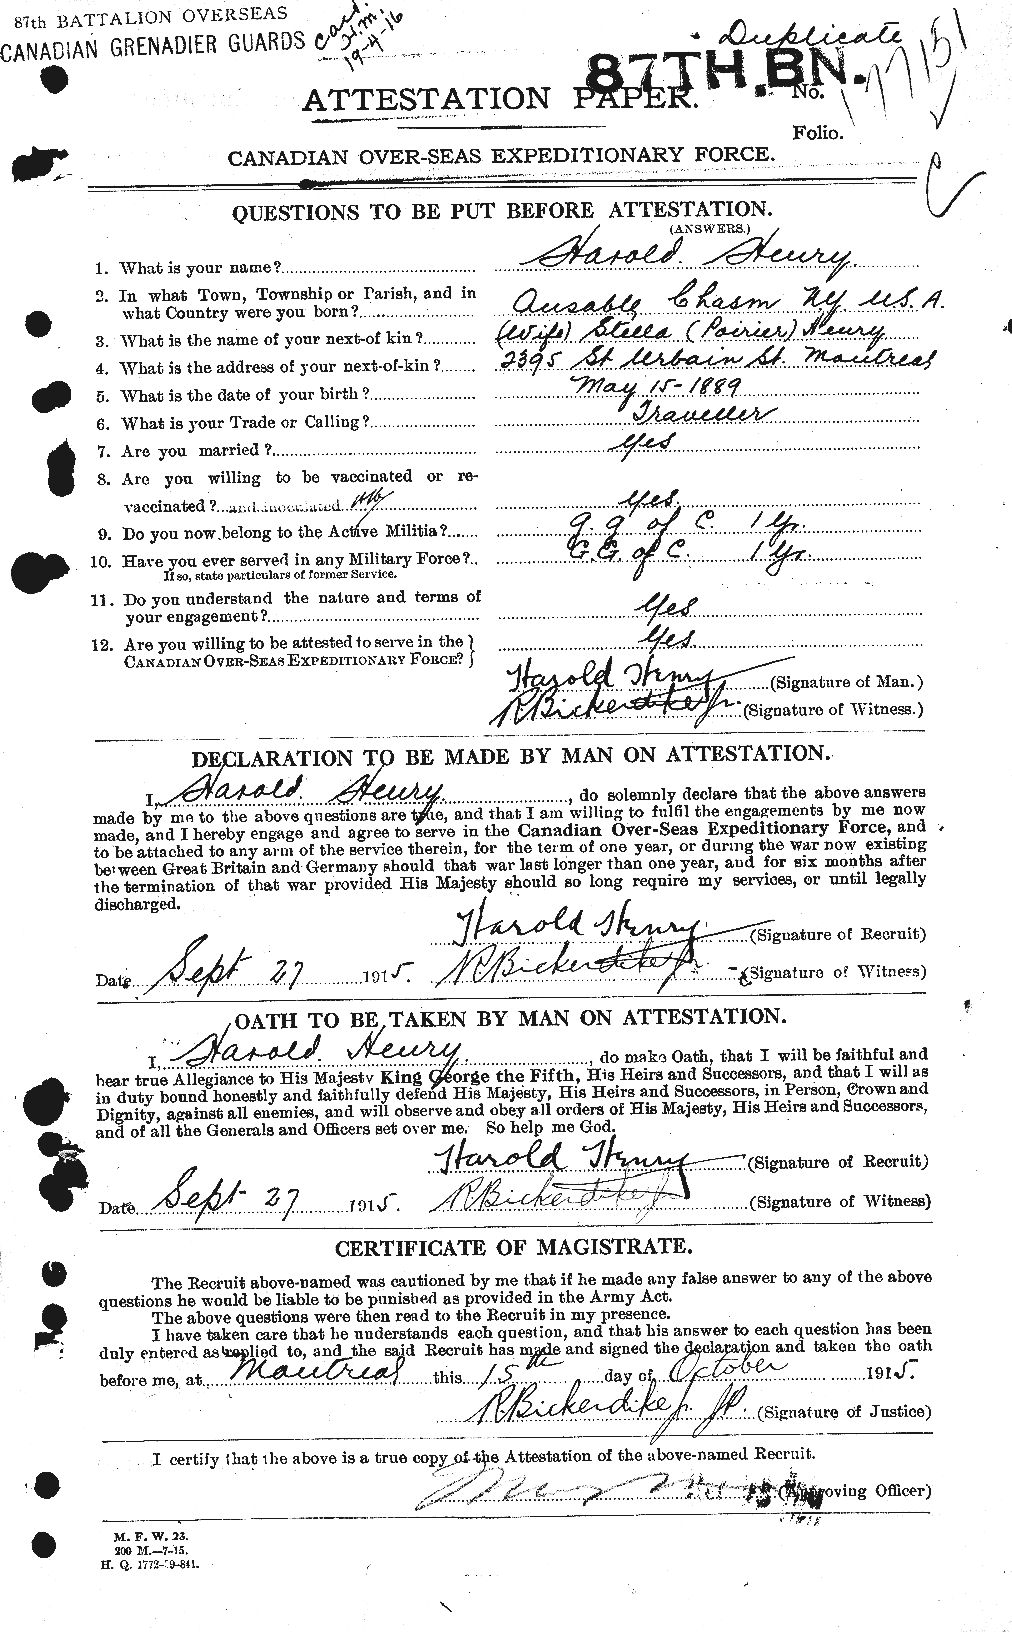 Personnel Records of the First World War - CEF 392884a